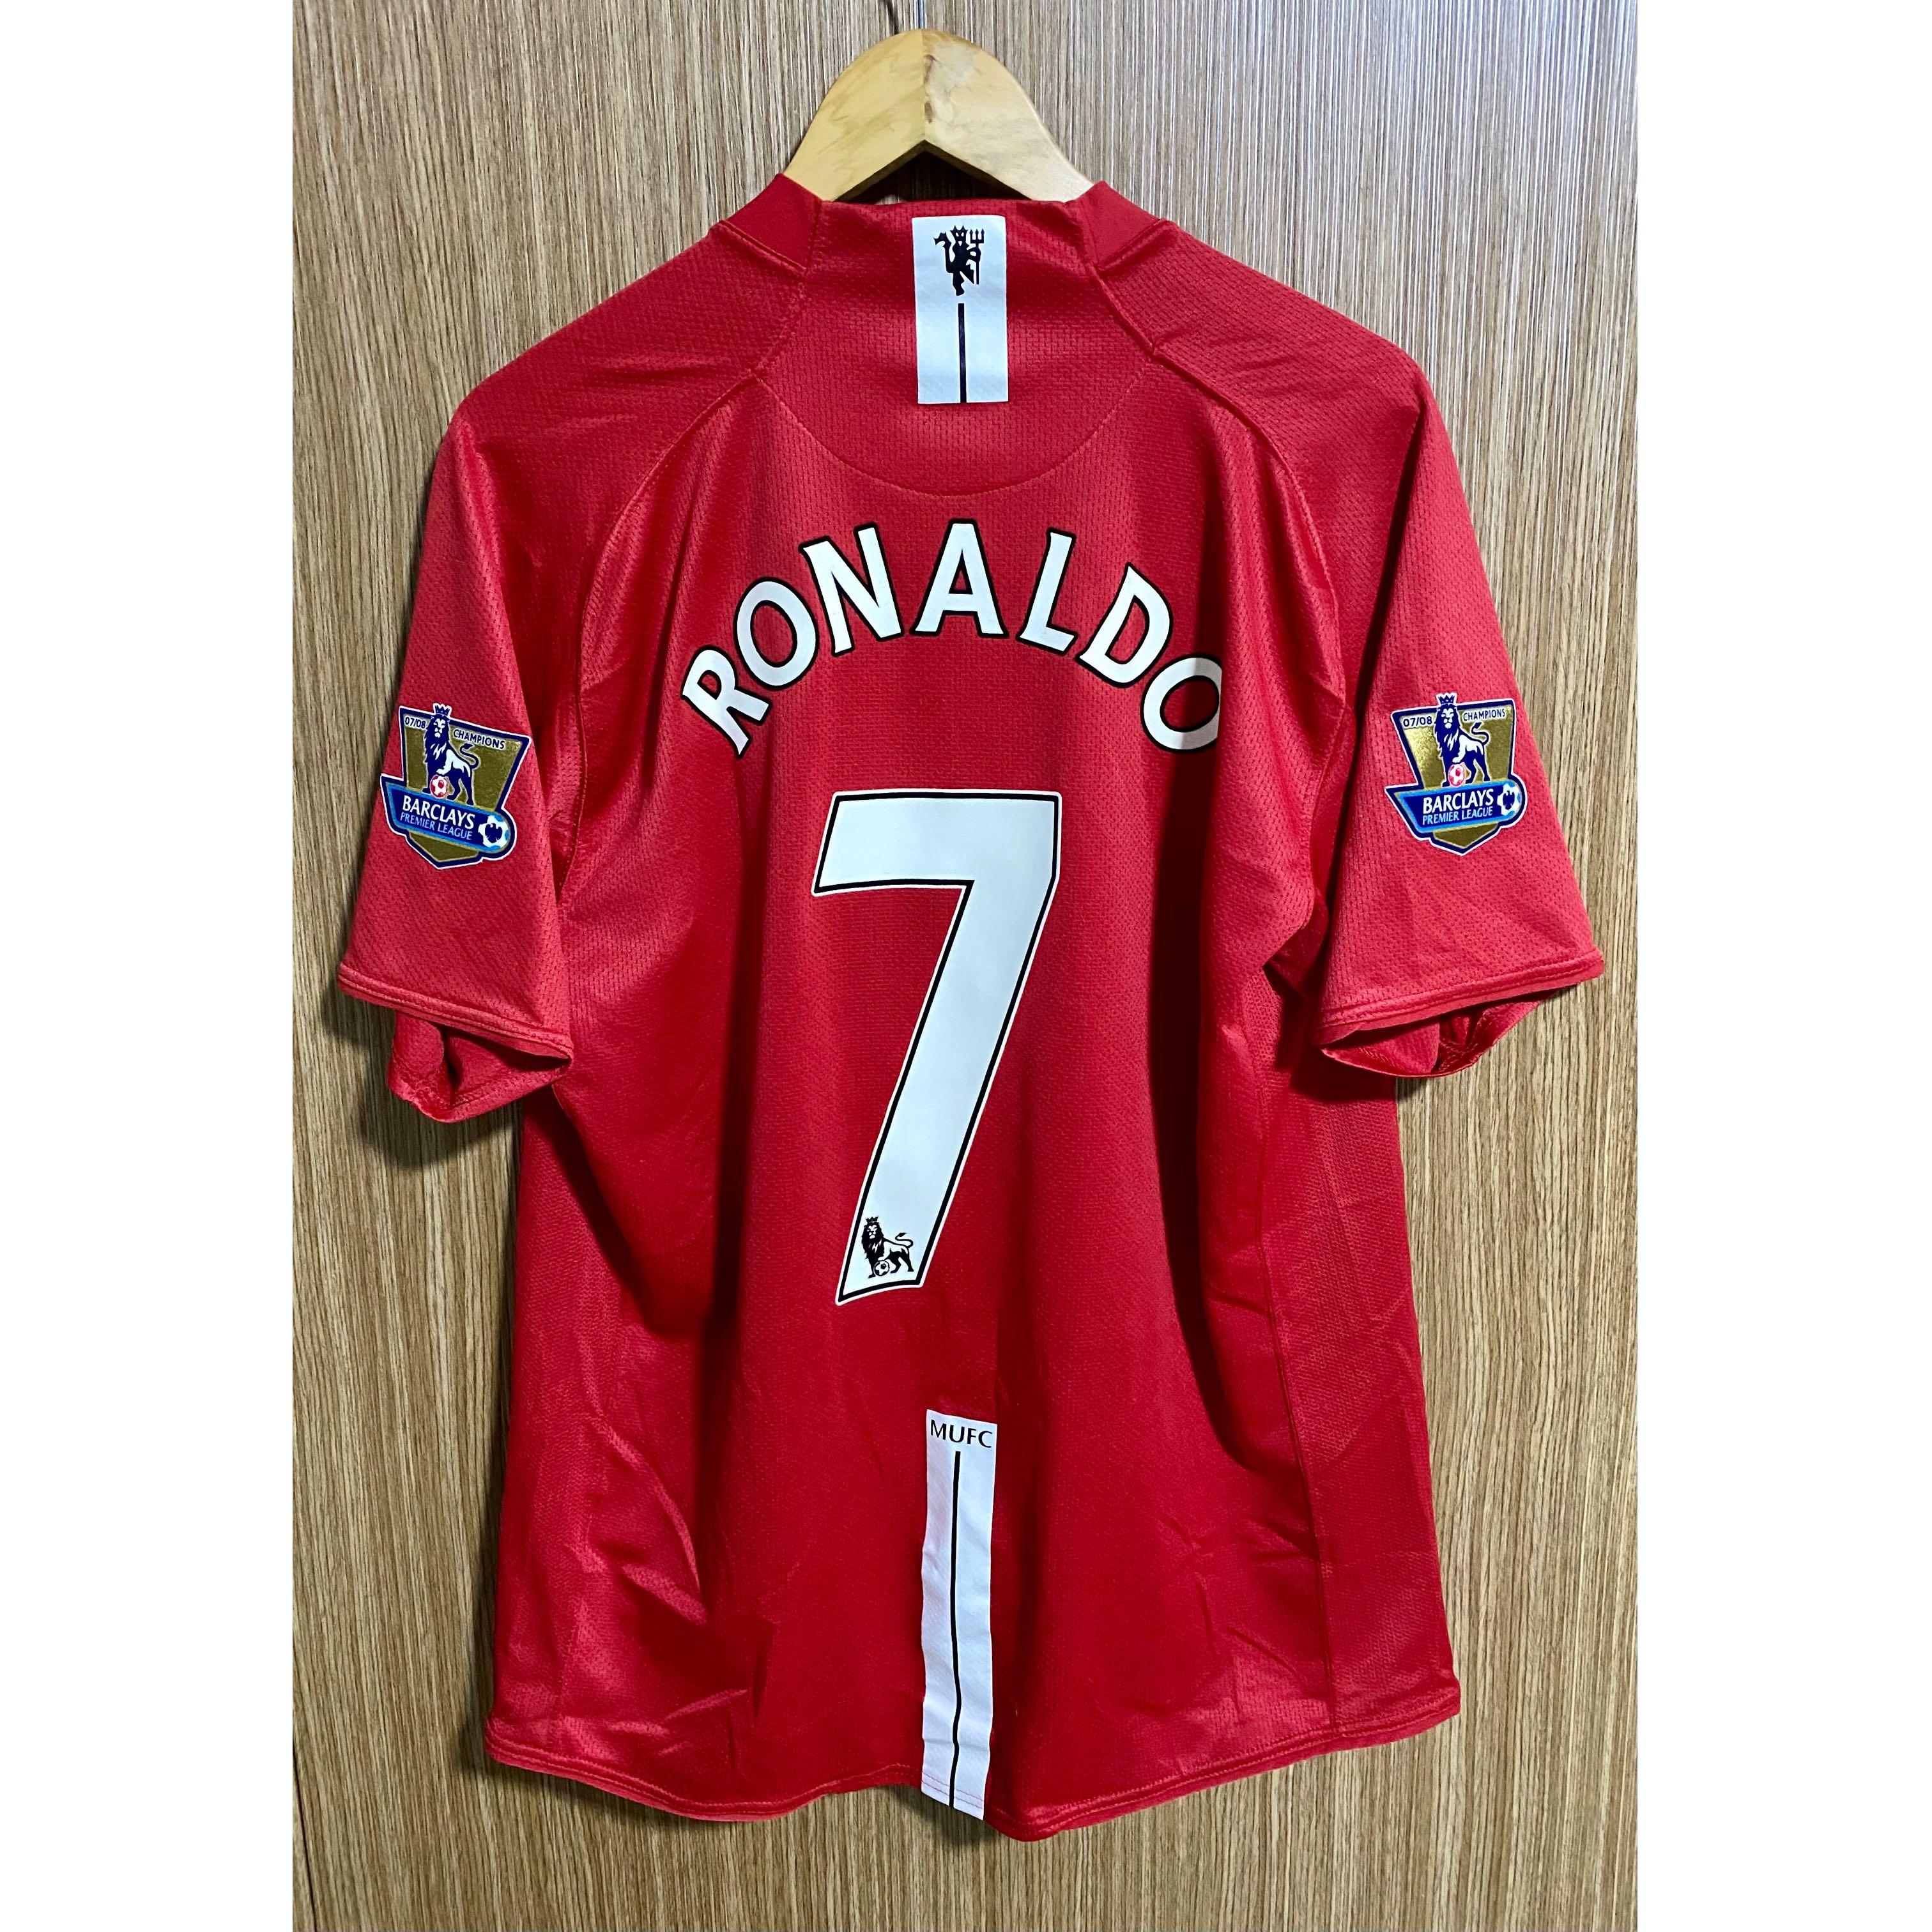 Manchester United Official 2007 2008 Shirt EPL Jersey Player Ronaldo 